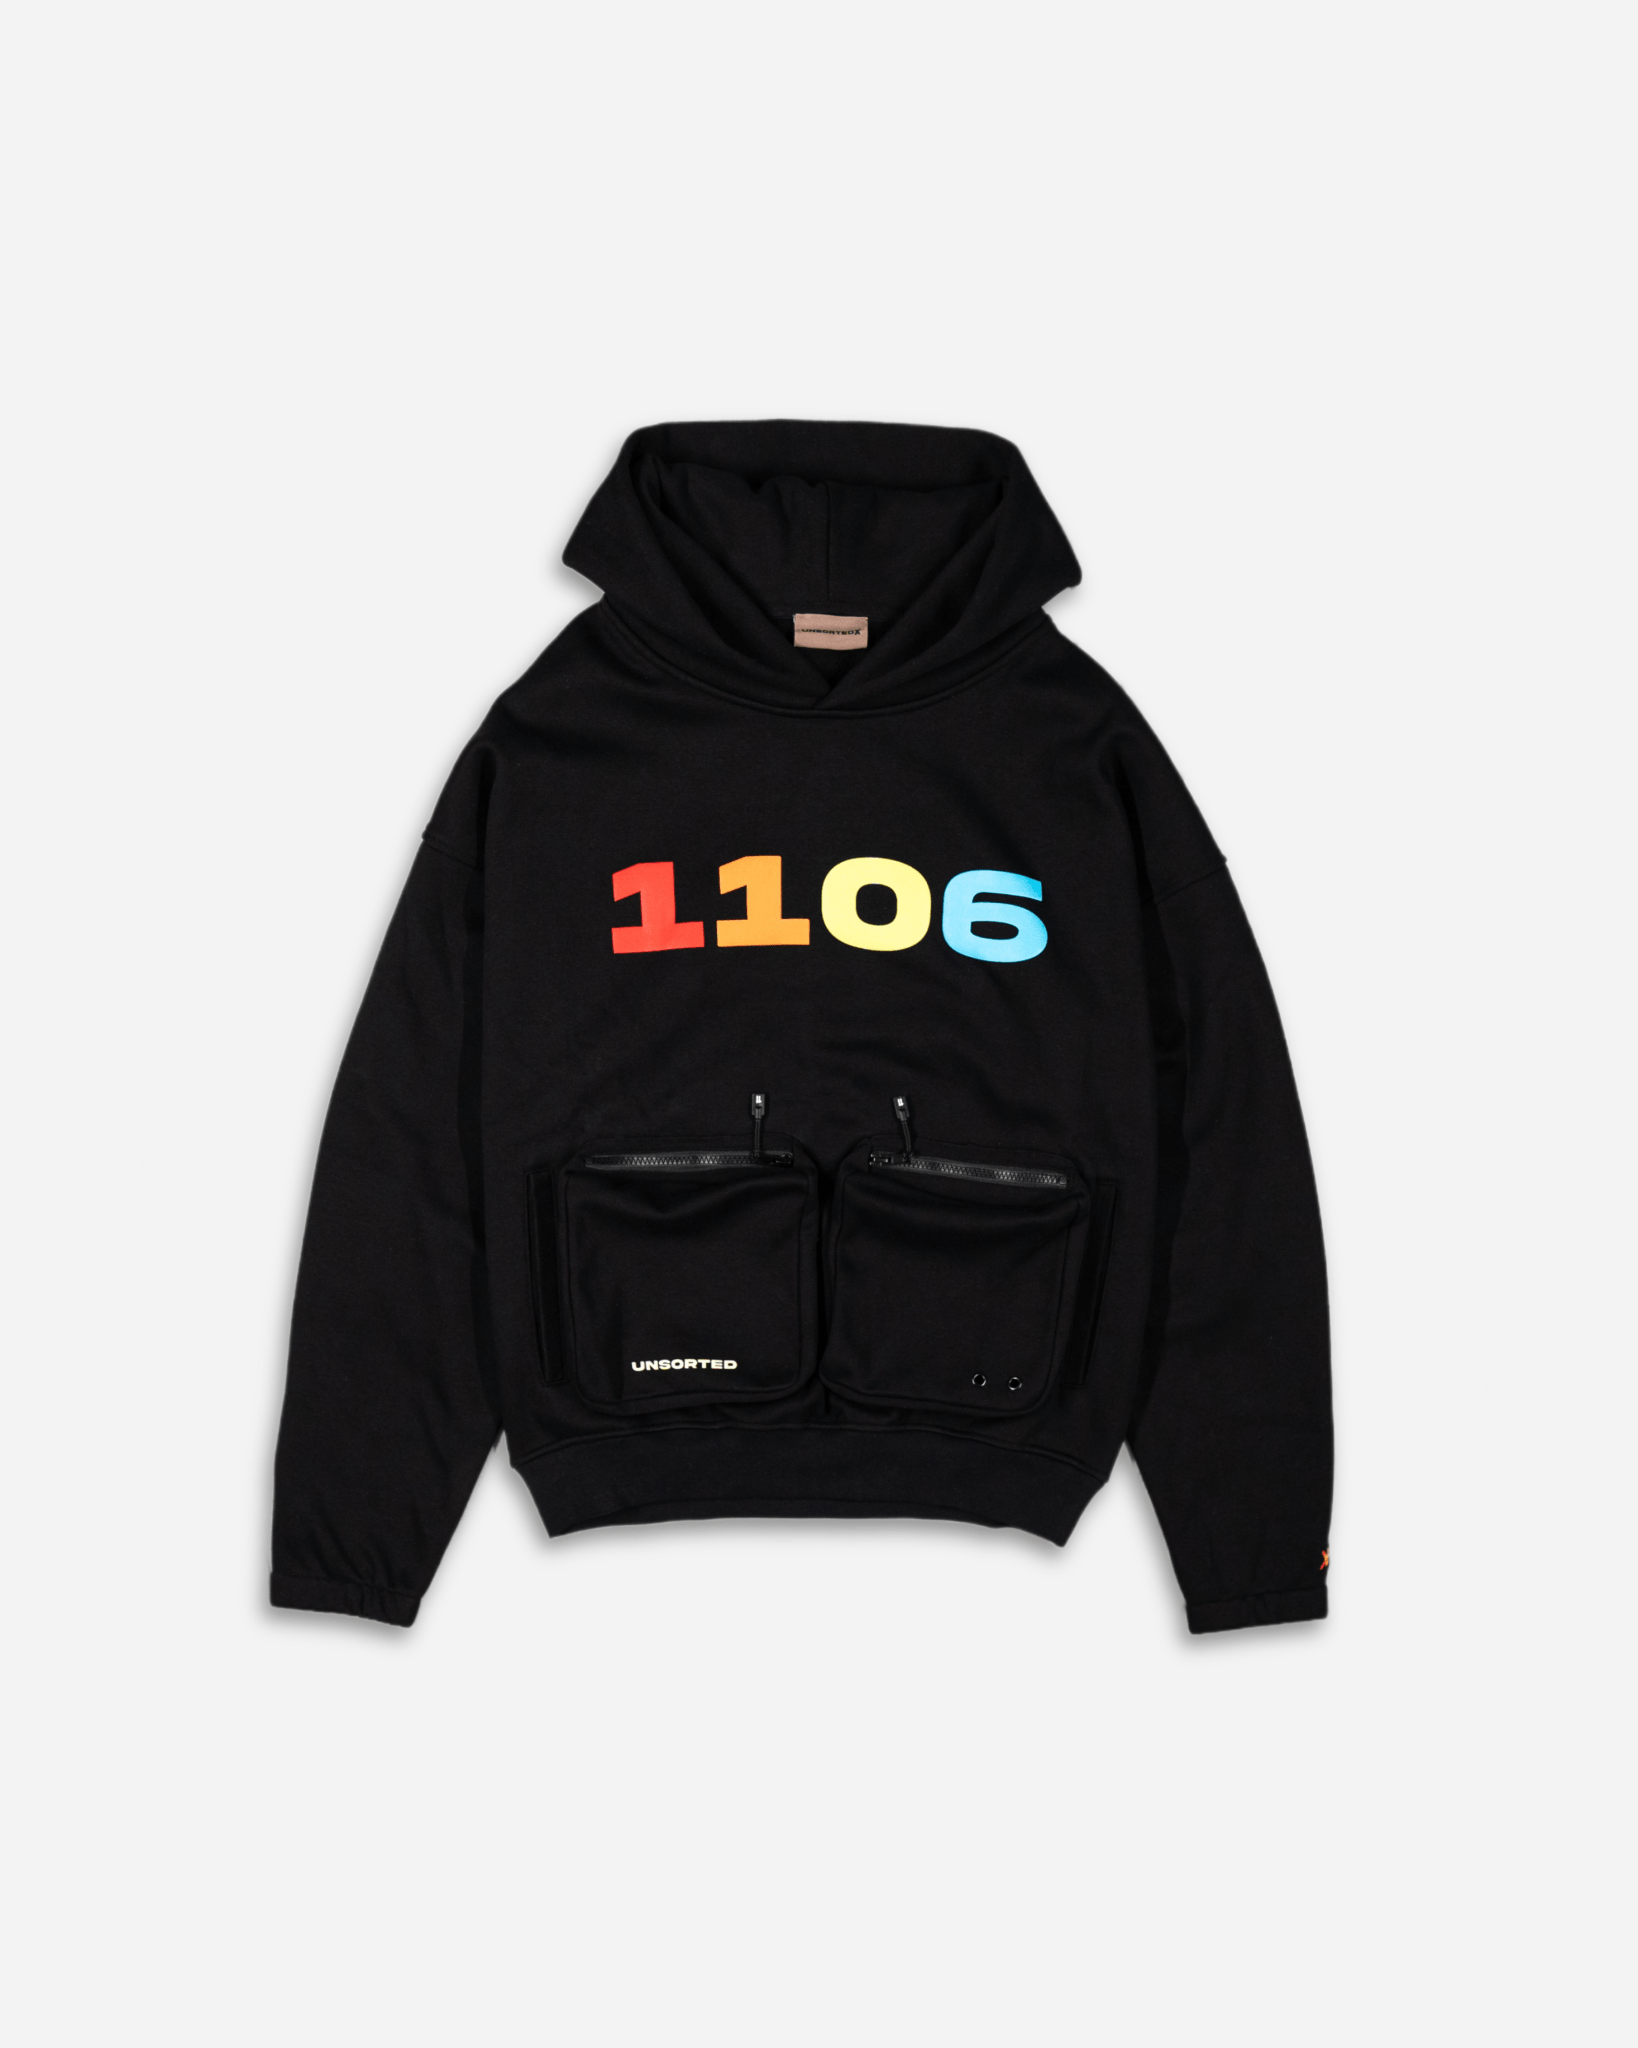 Meaning behind the "1106" on Unsorted x Cargo Hoodie - Unsorted x